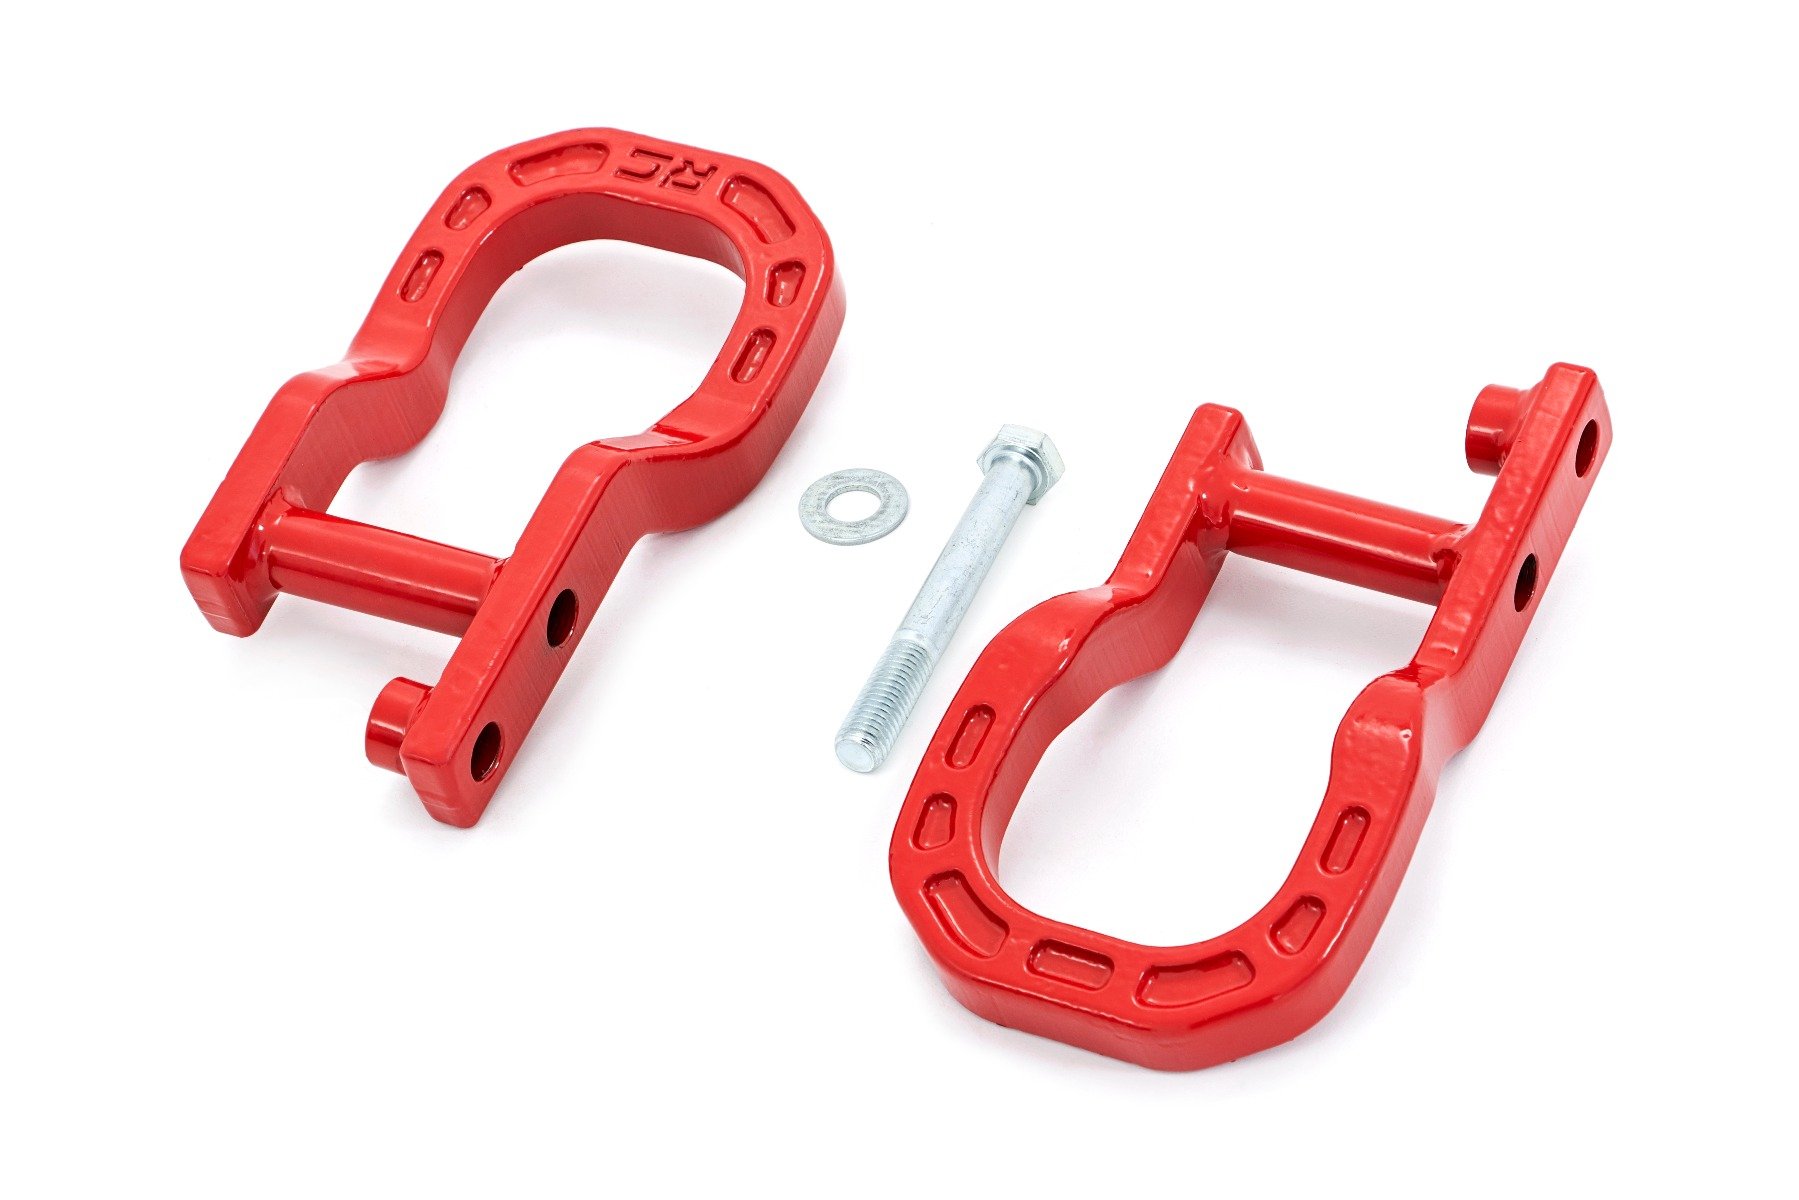 Silverado Rough Country 1500 Forged Tow Hooks; Red Chevy RS134